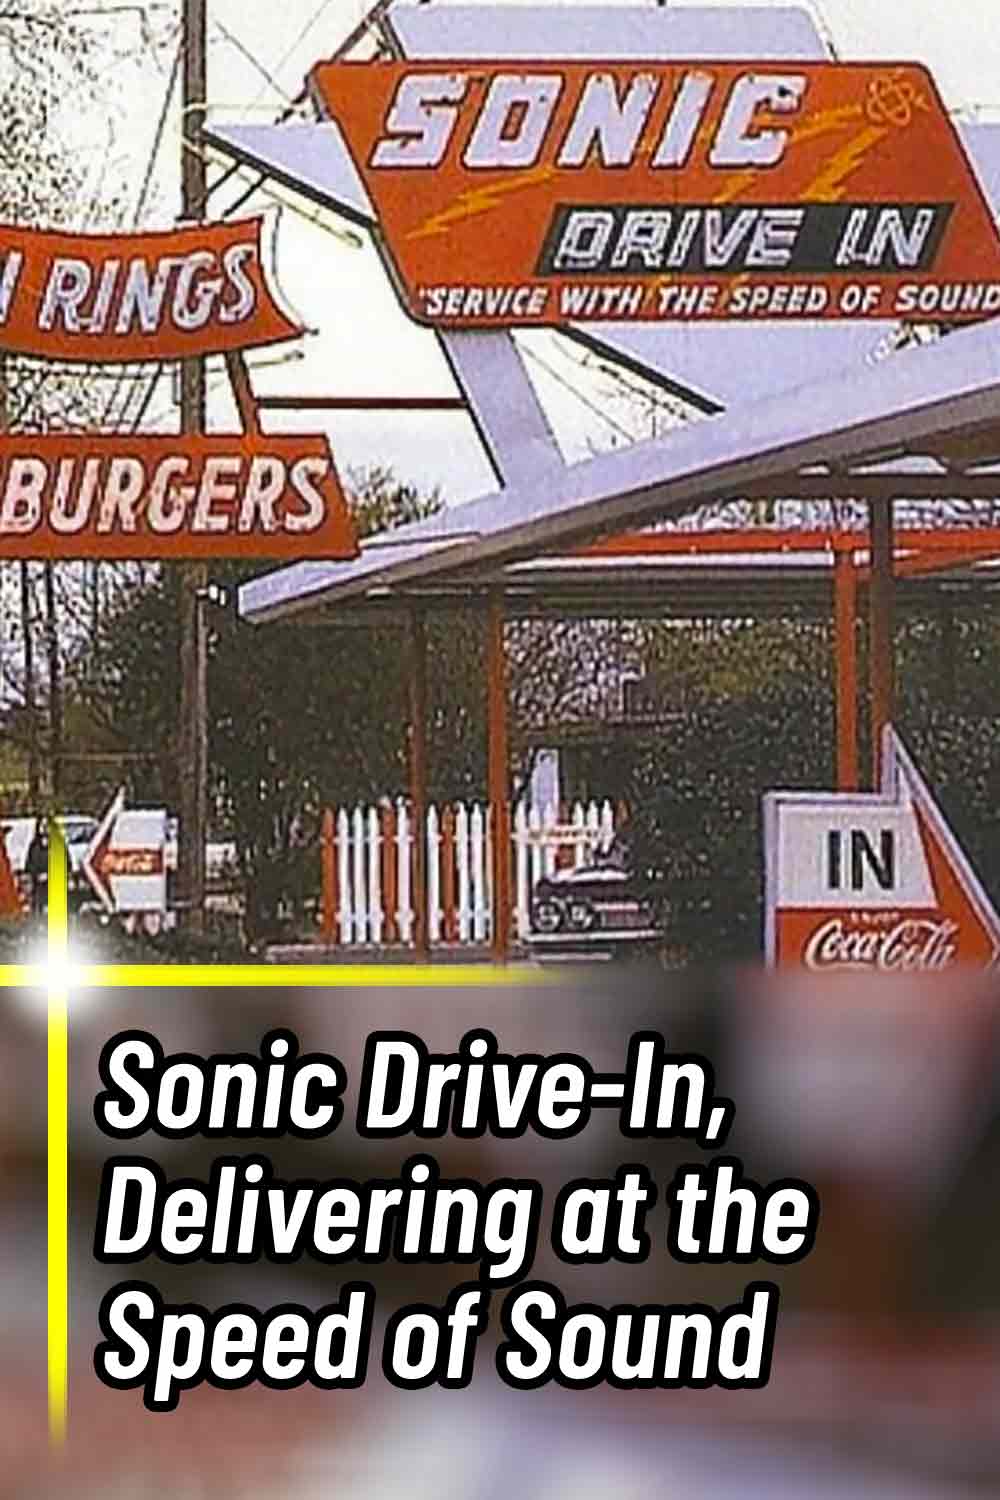 Sonic Drive-In, Delivering at the Speed of Sound